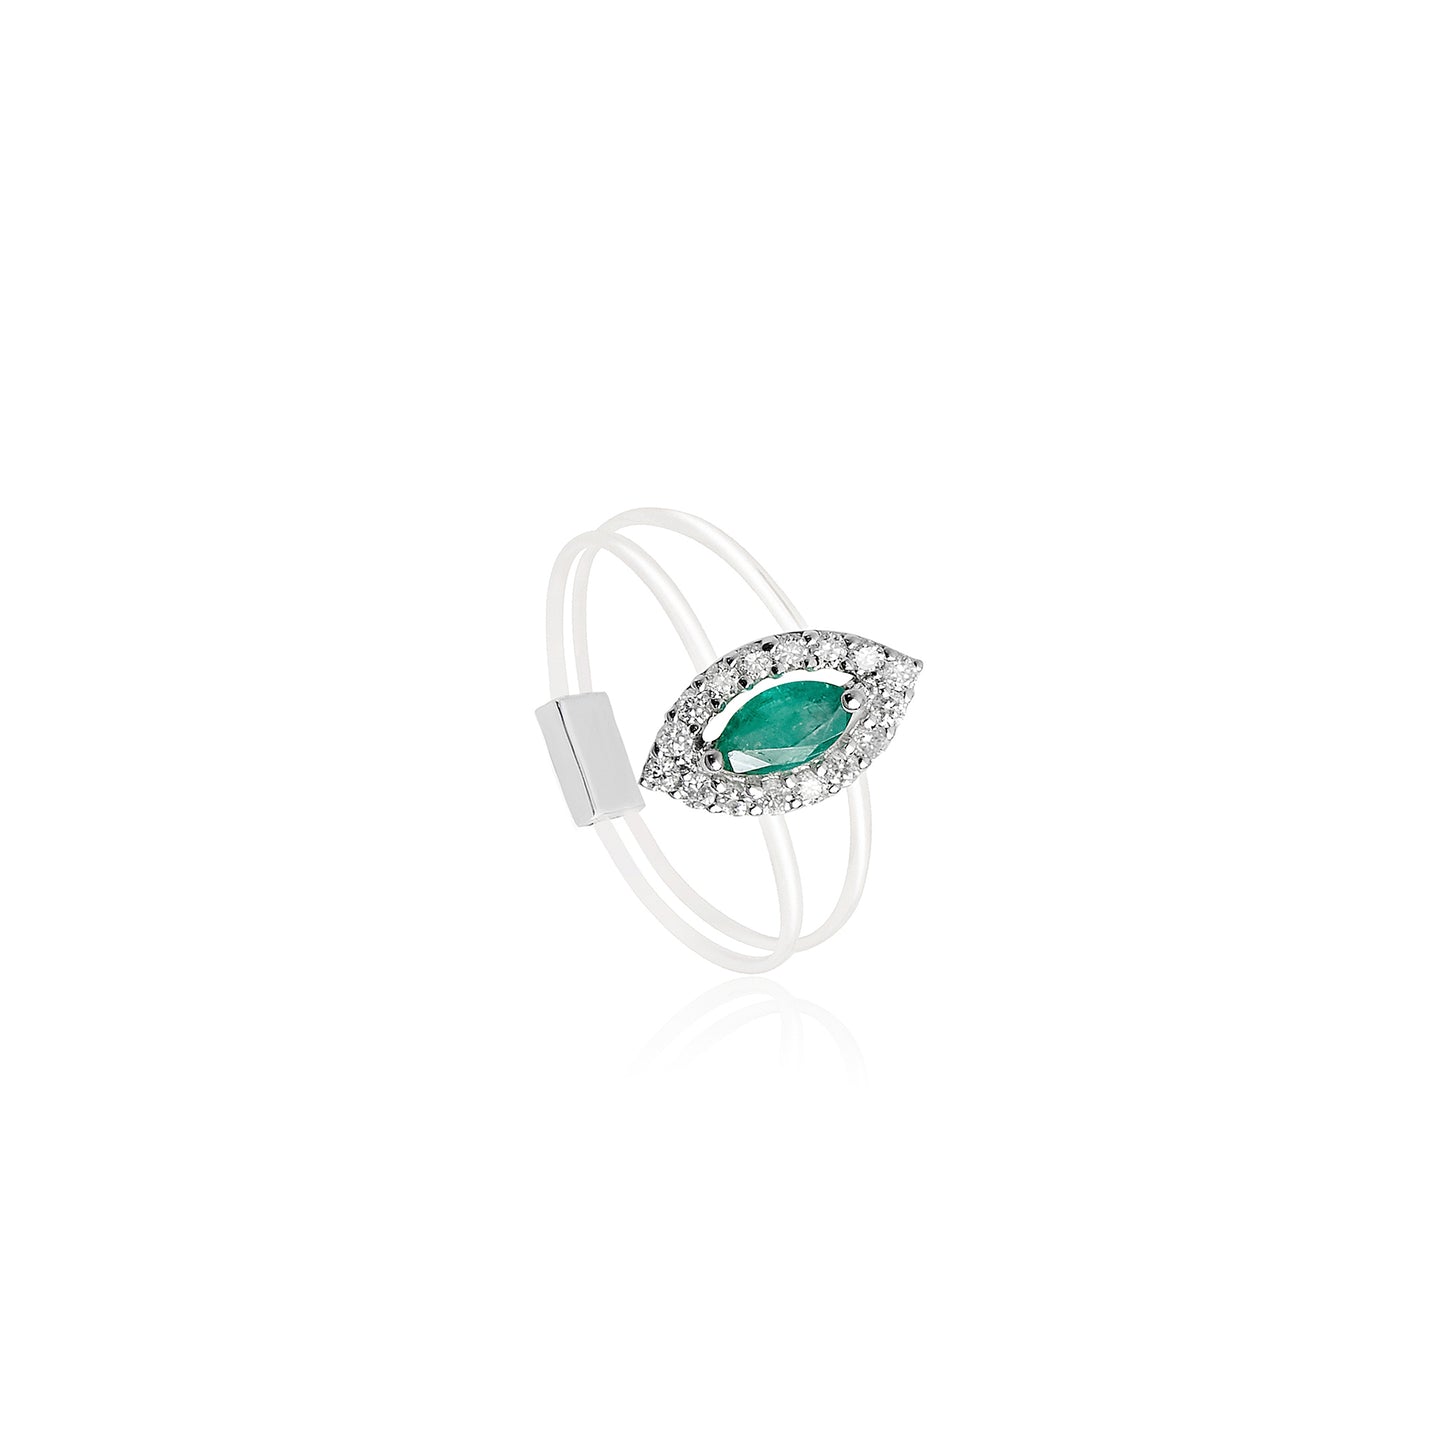 SPARKLE OVAL CUT EMERALD RING